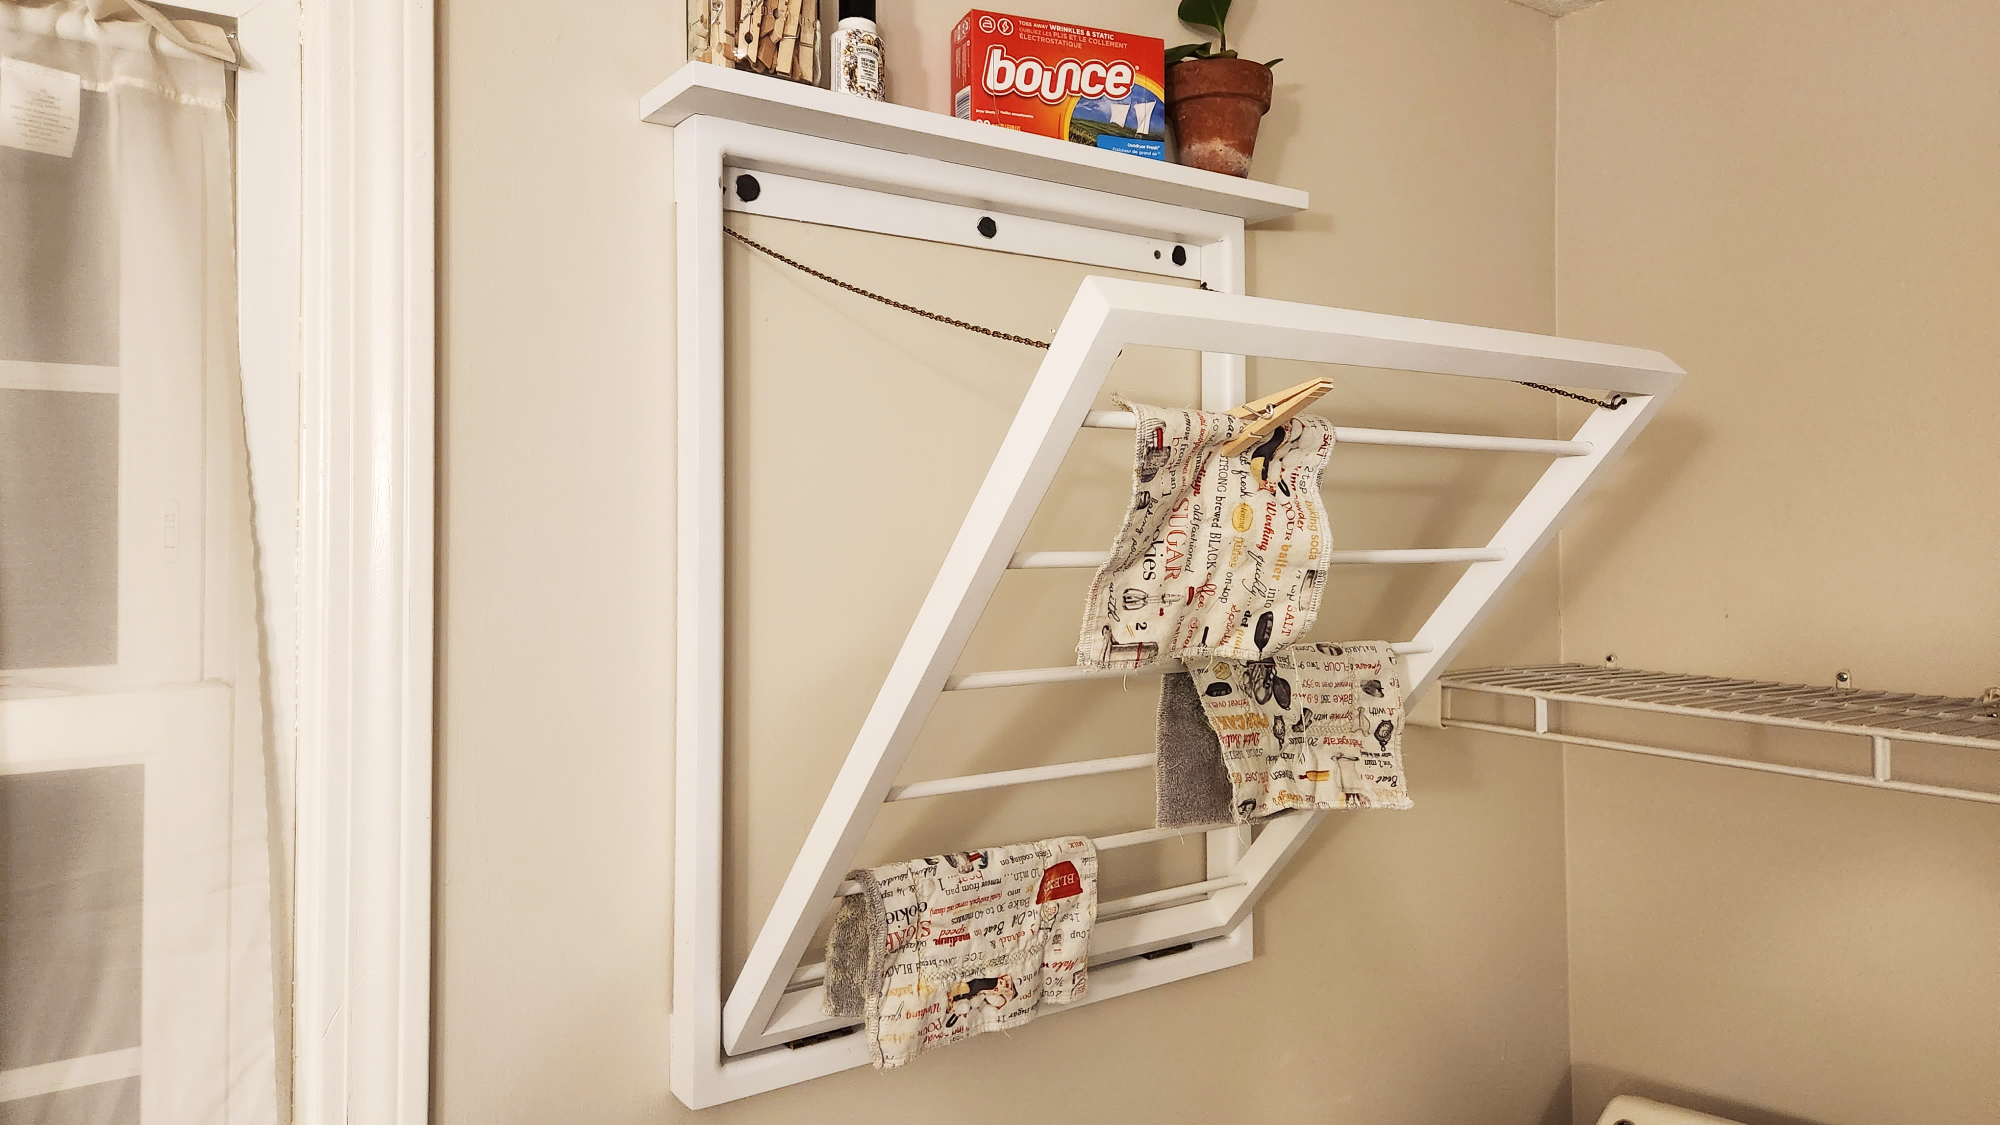 How to build a DIY laundry drying rack